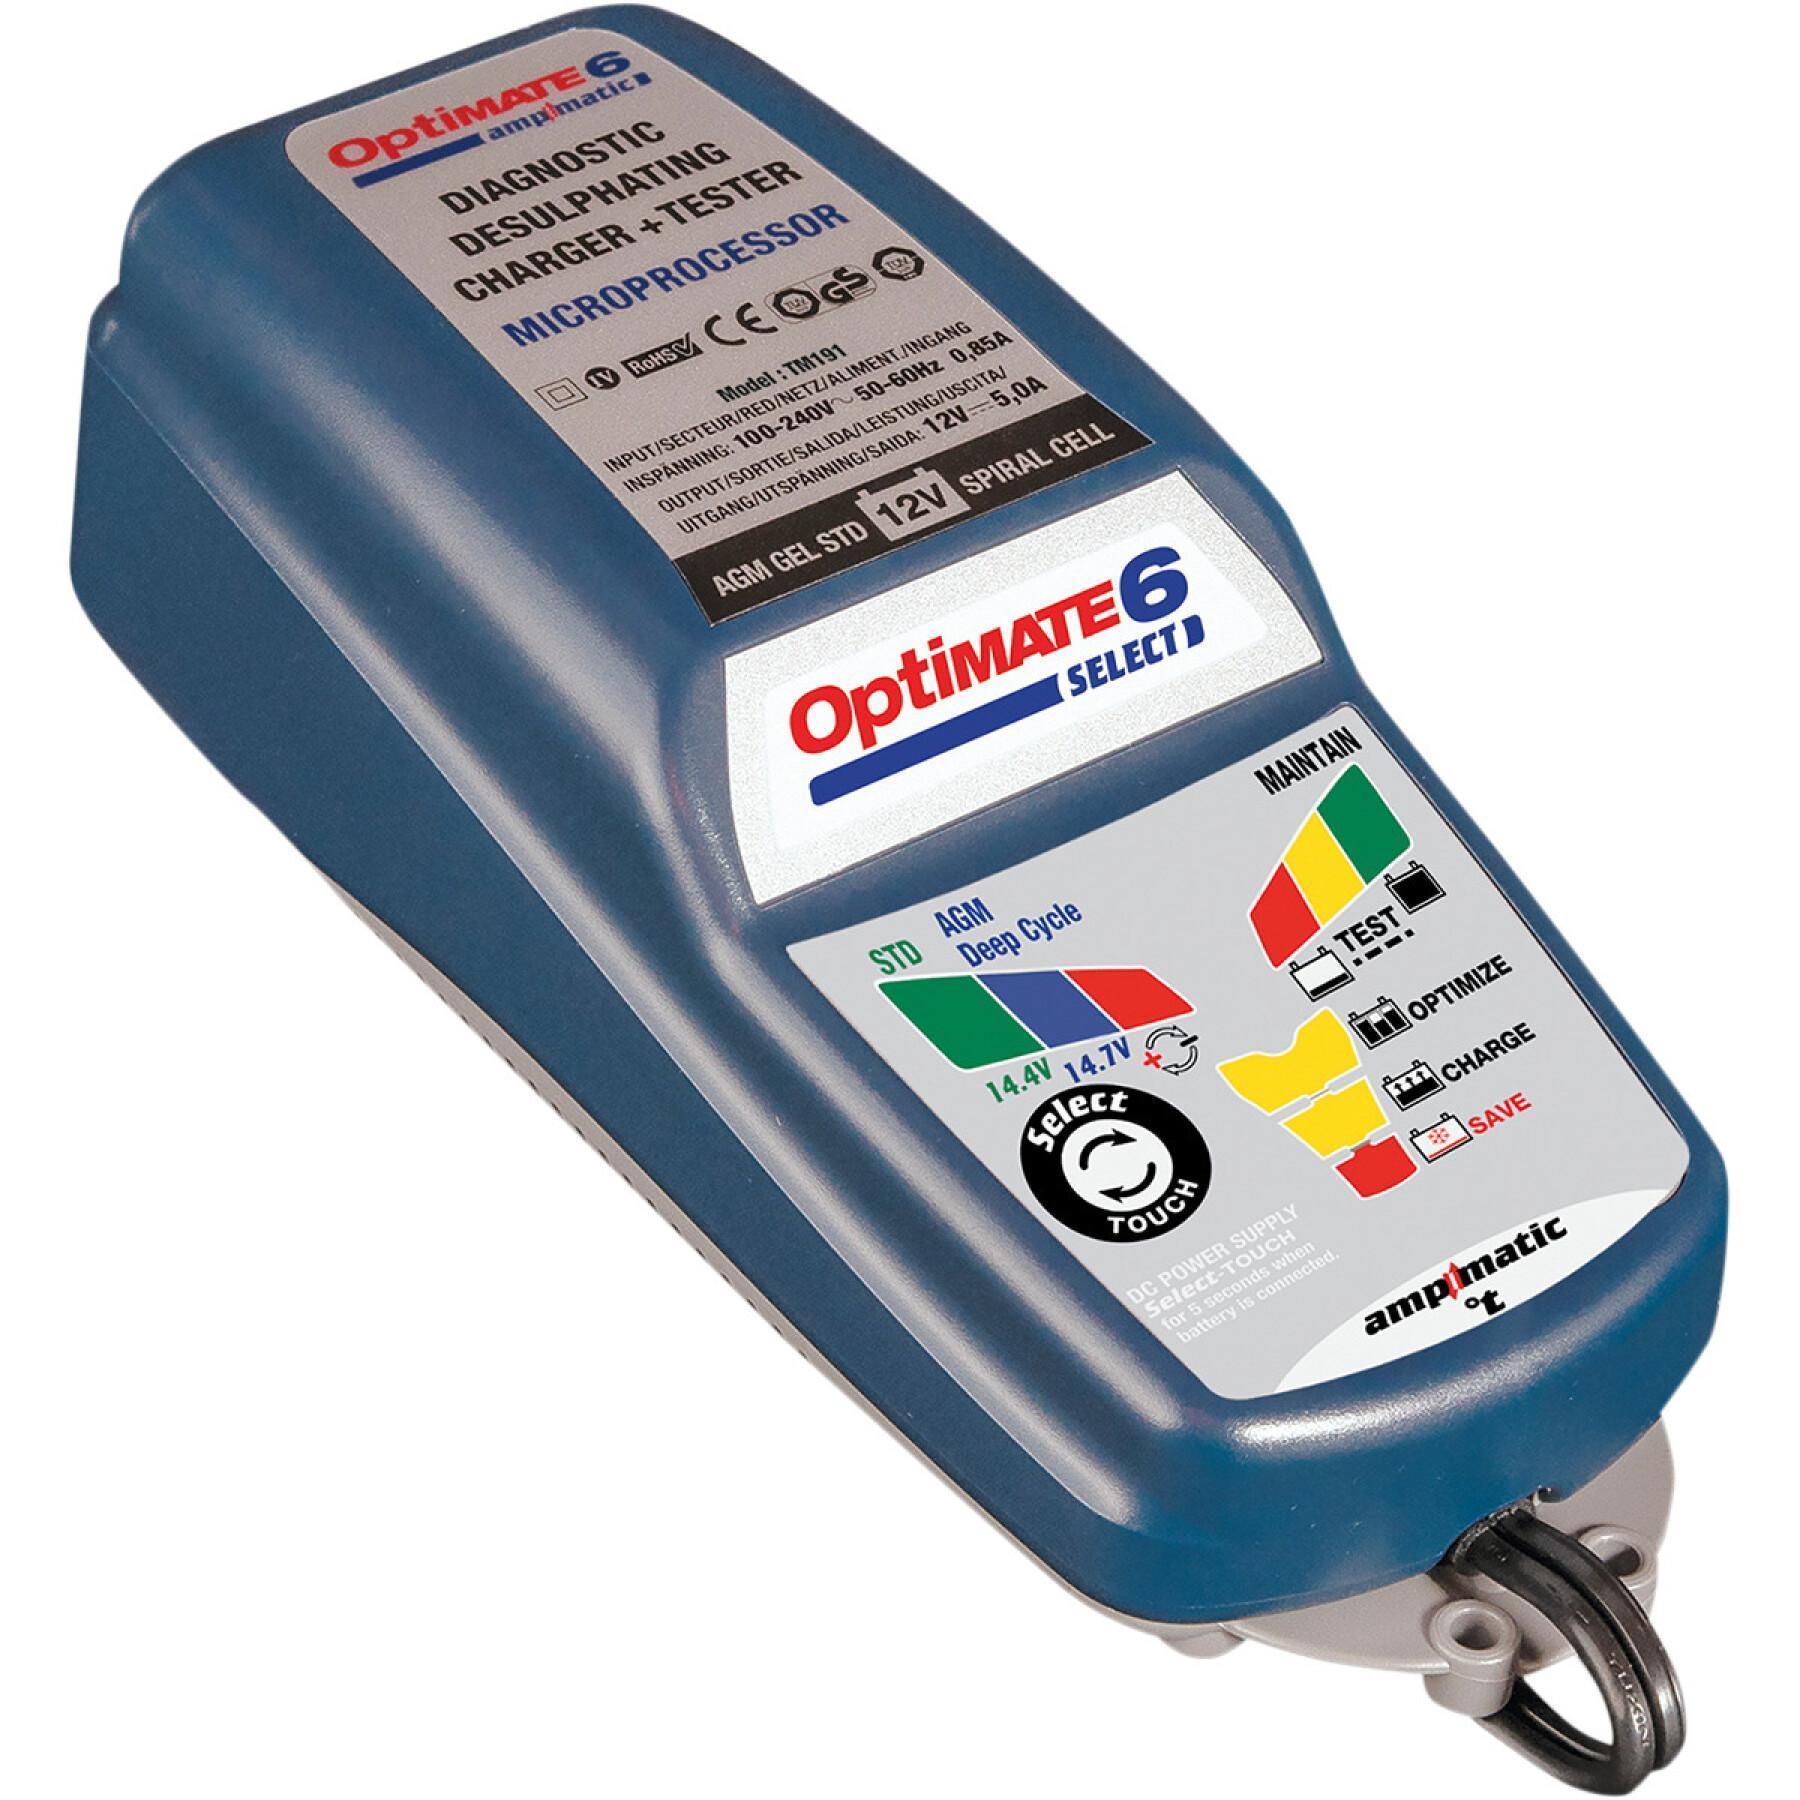 Motorcycle battery charger Tecmate Optimate 6 ampmatic